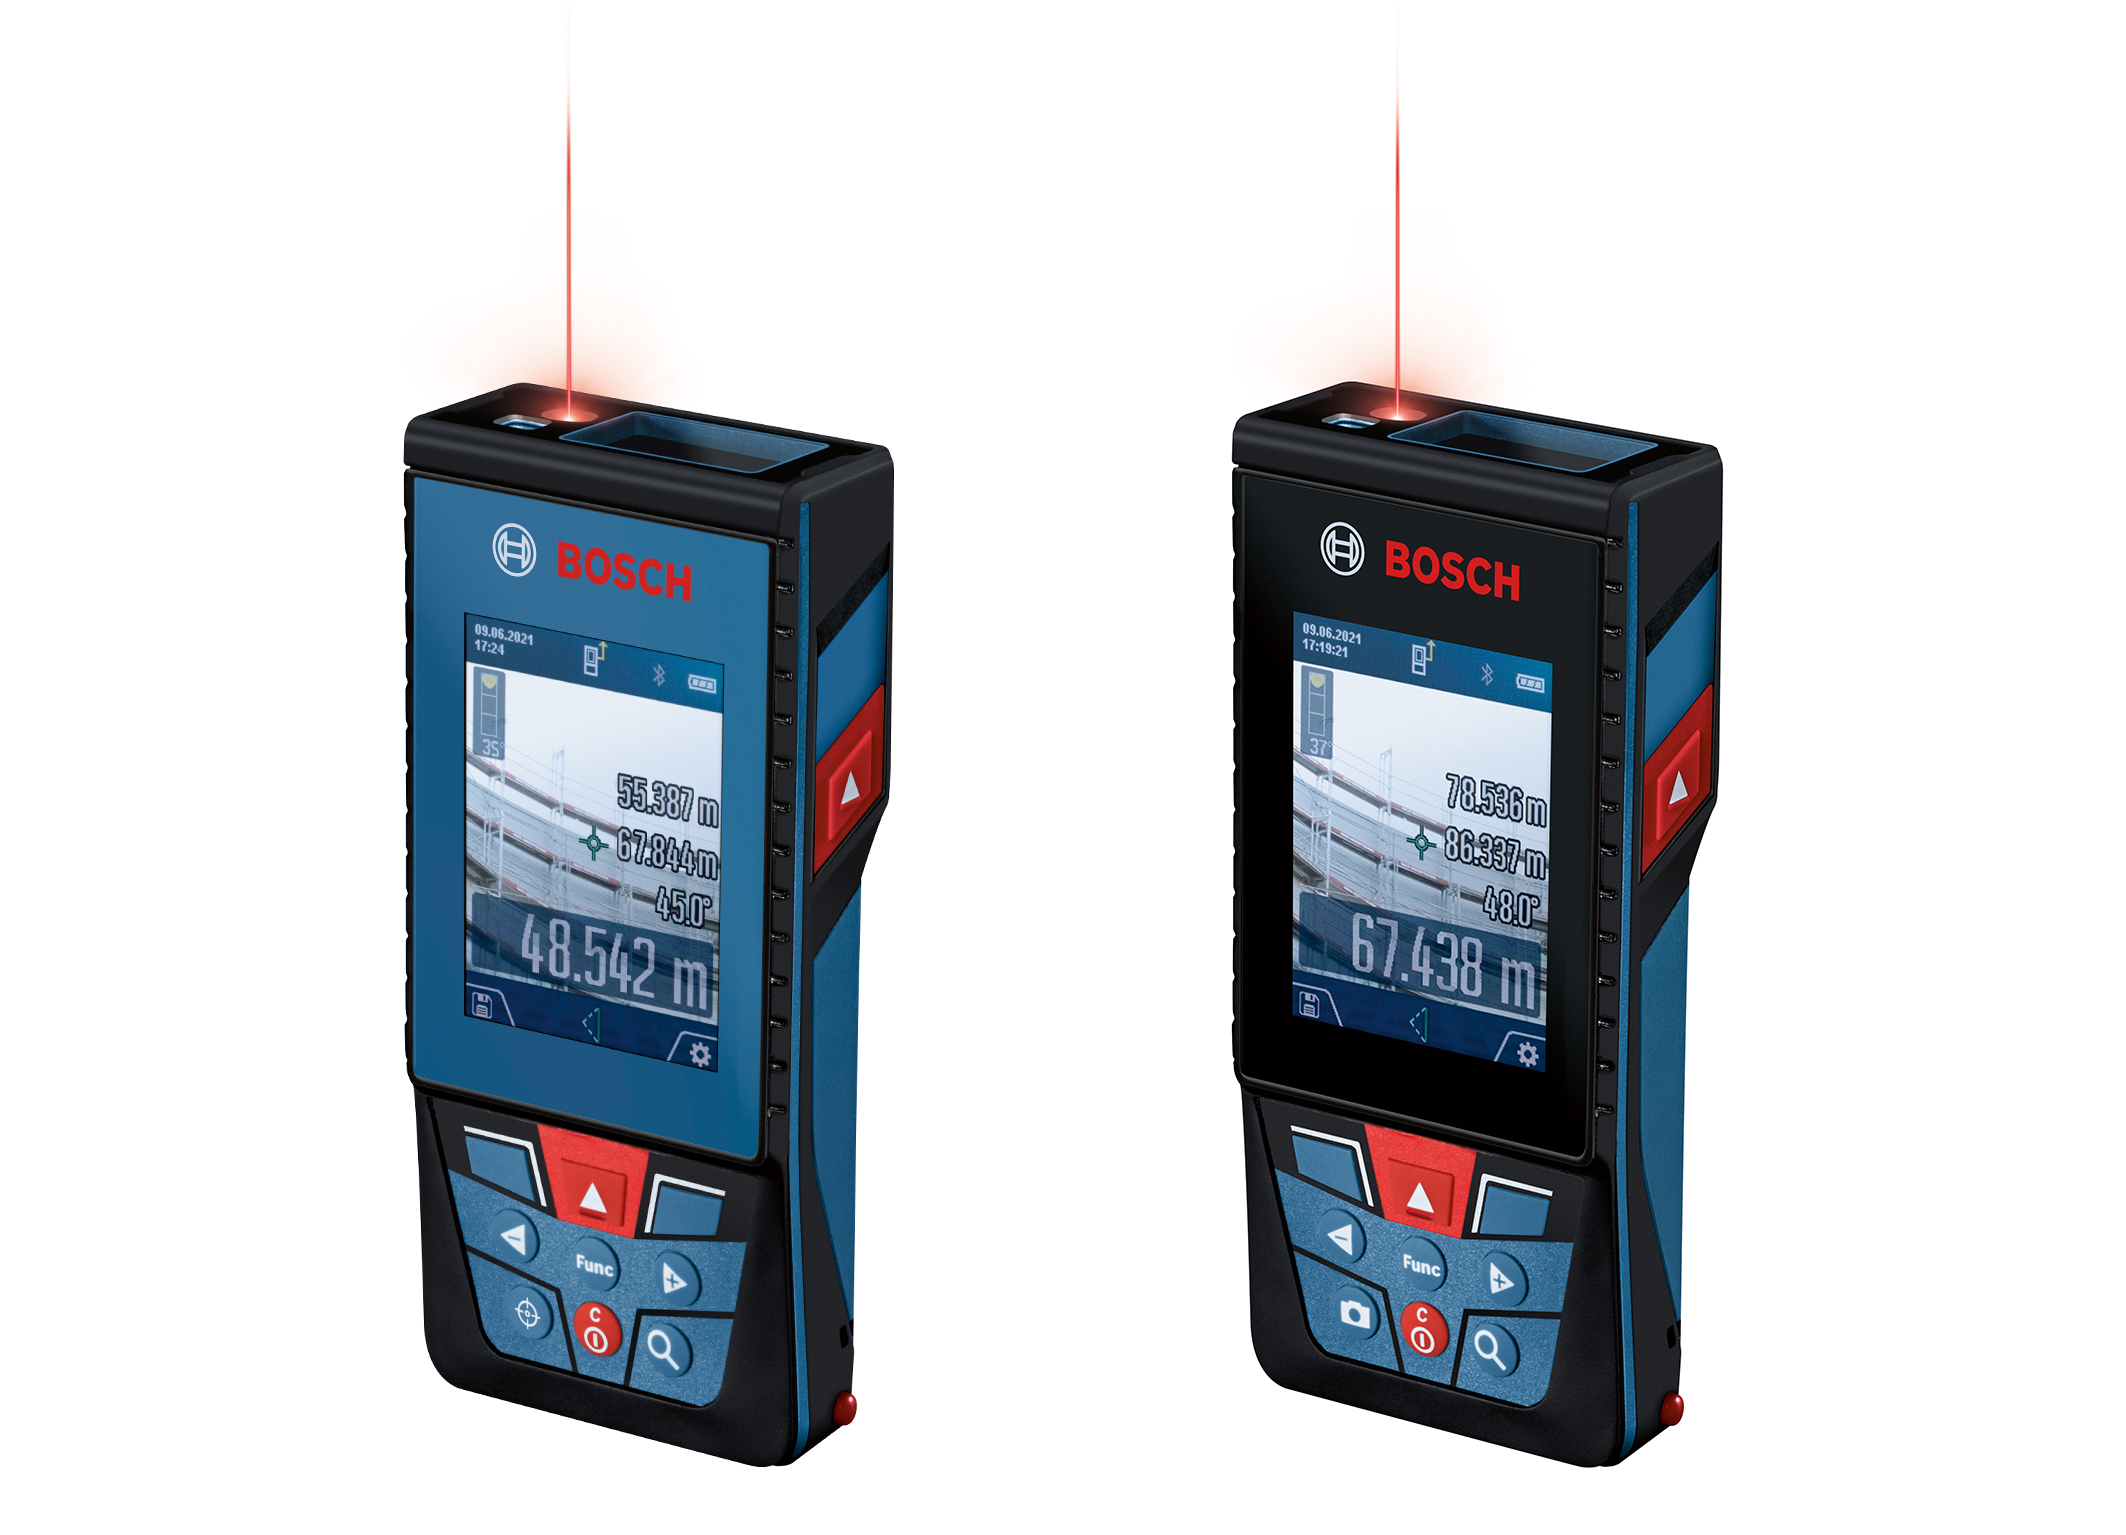 High accuracy over distances up to 150 meters: New Bosch laser measures with camera